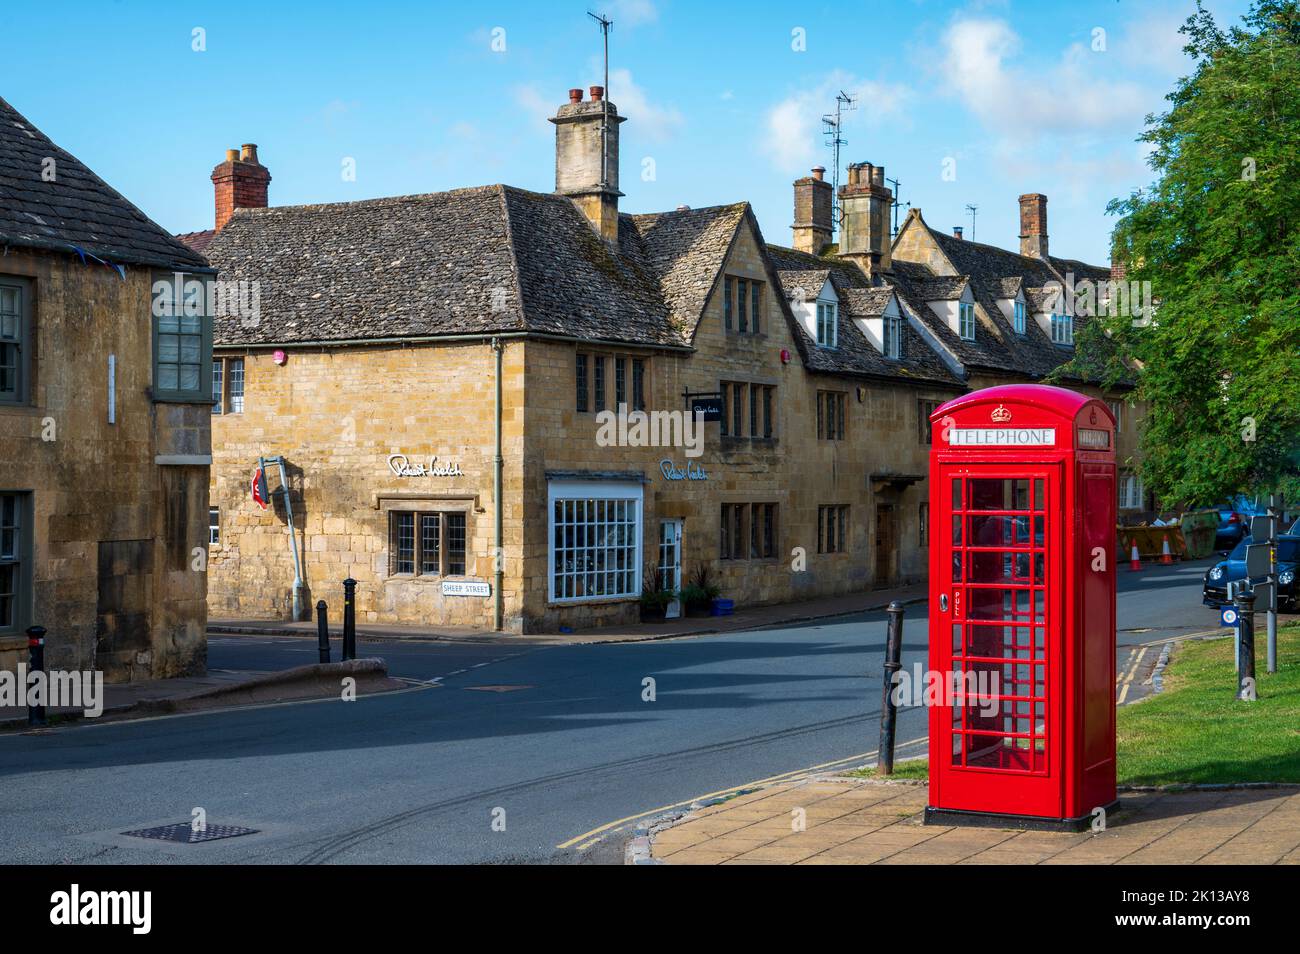 Red telephone box on High Street, Chipping Campden, Cotswolds, Gloucestershire, England, United Kingdom, Europe Stock Photo